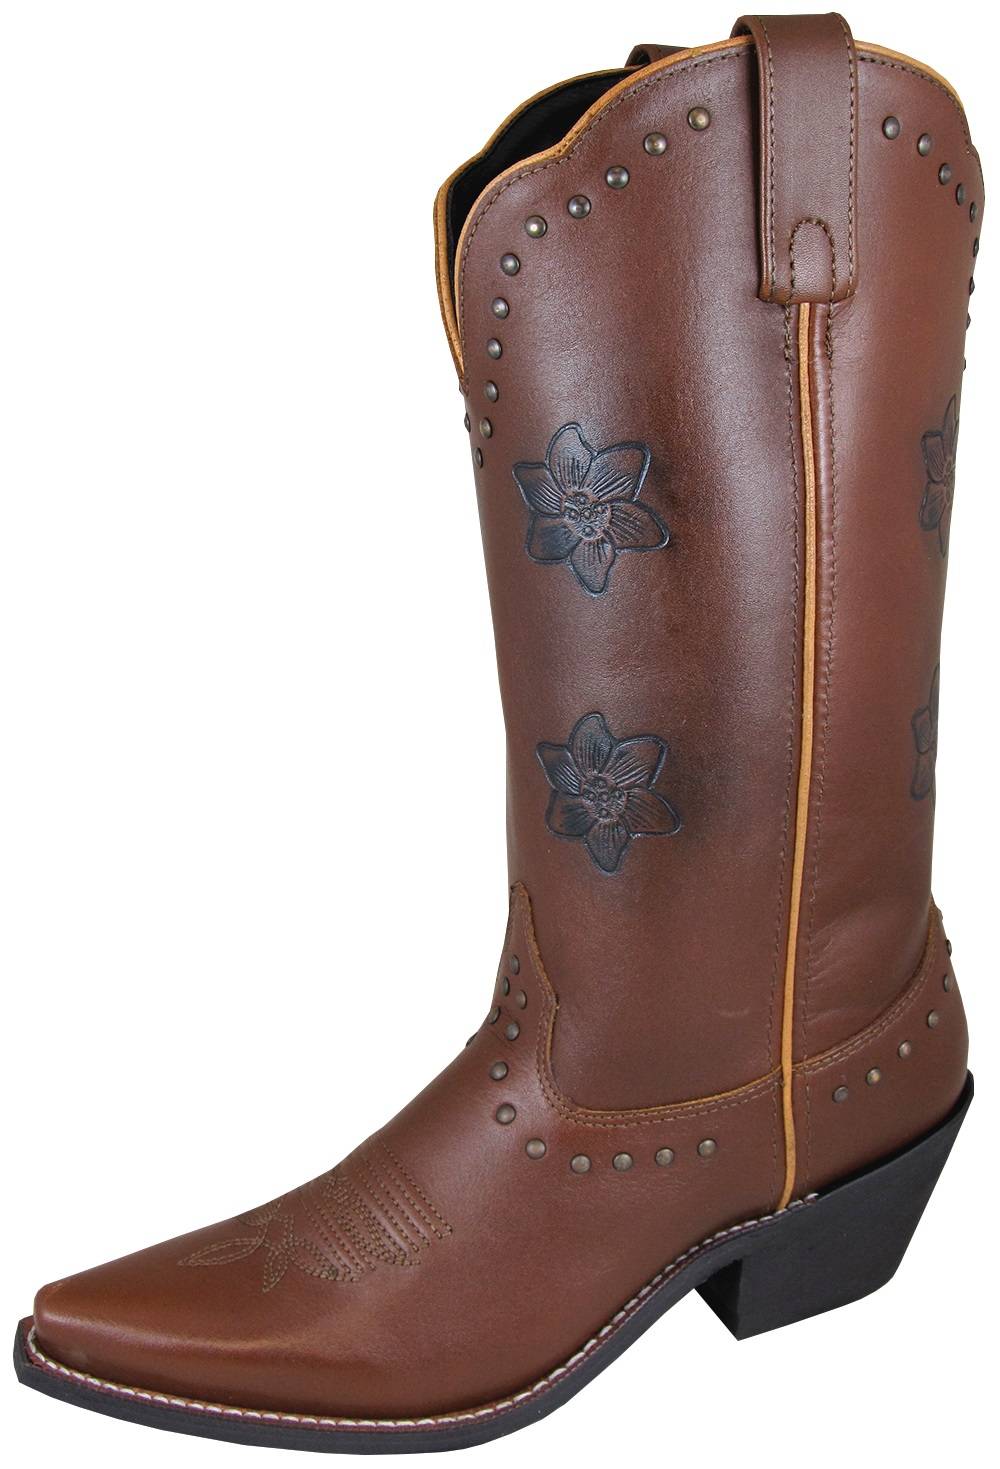 Smoky Mountain Lilac Boots - Ladies - Brown